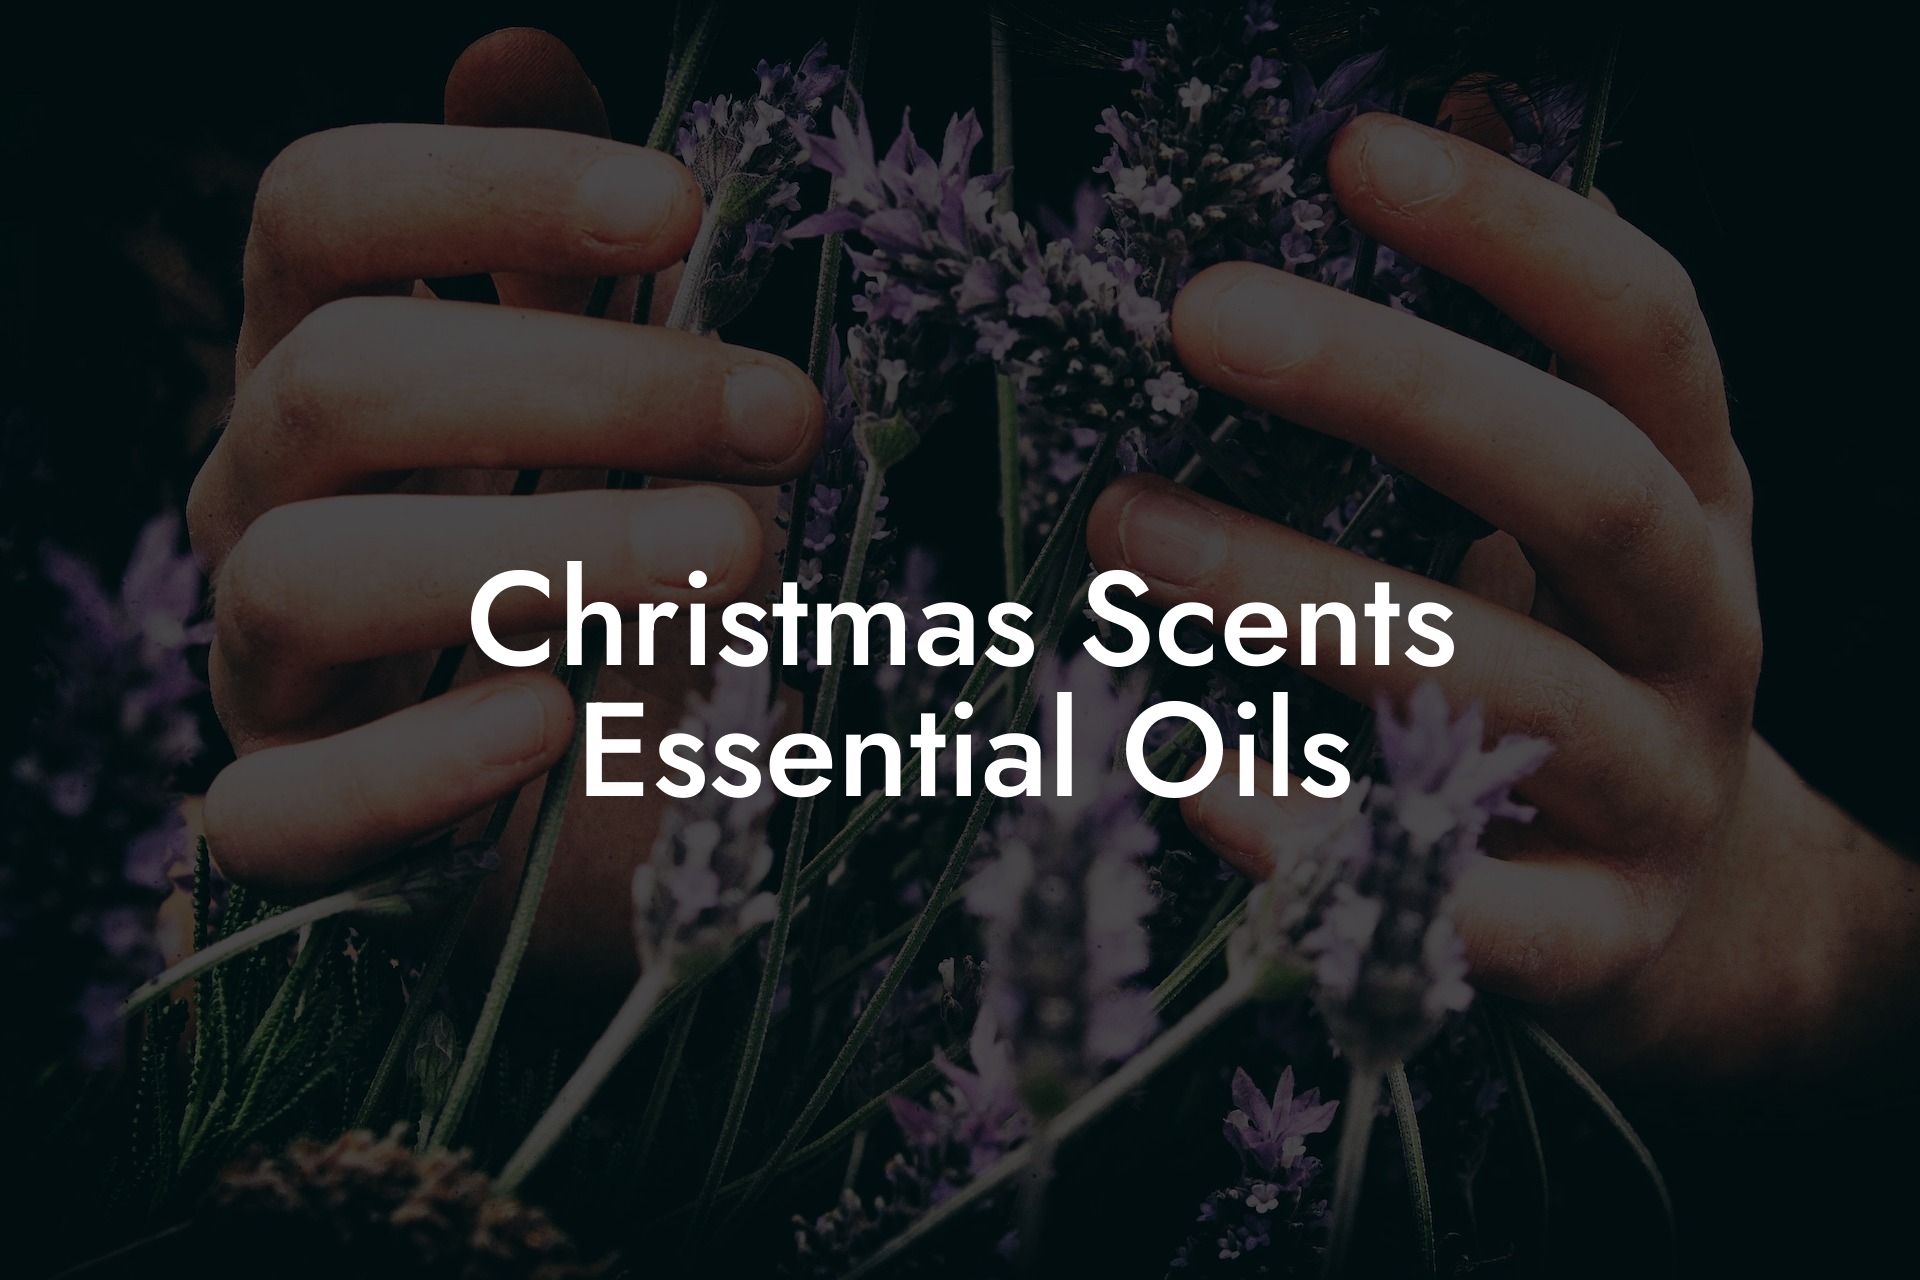 Christmas Scents Essential Oils